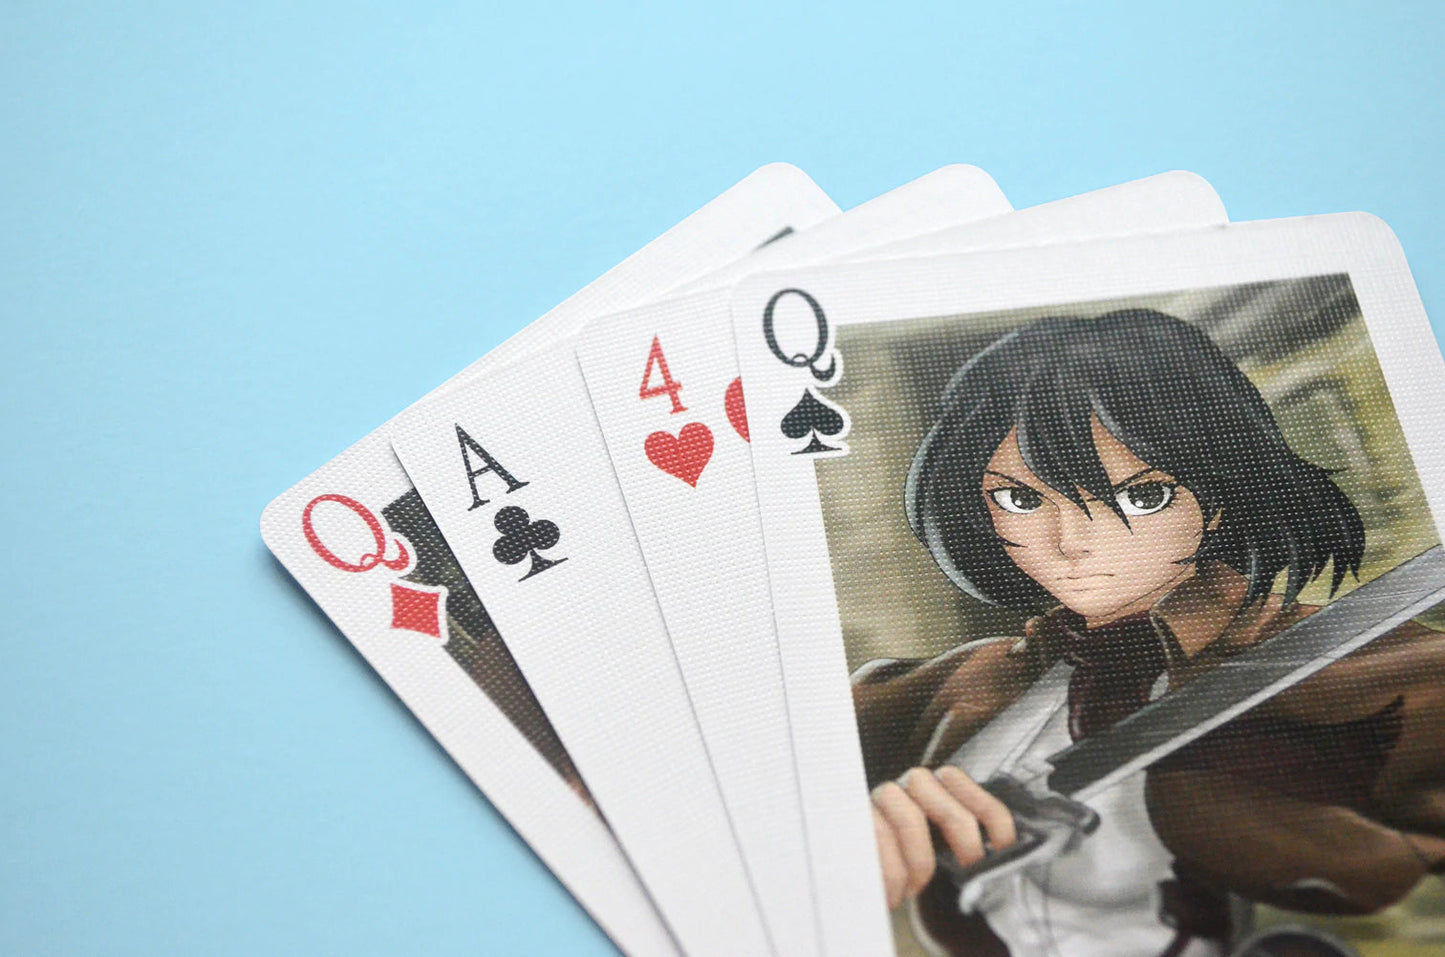 Luck of kings cards attack on titans custom manufacturer